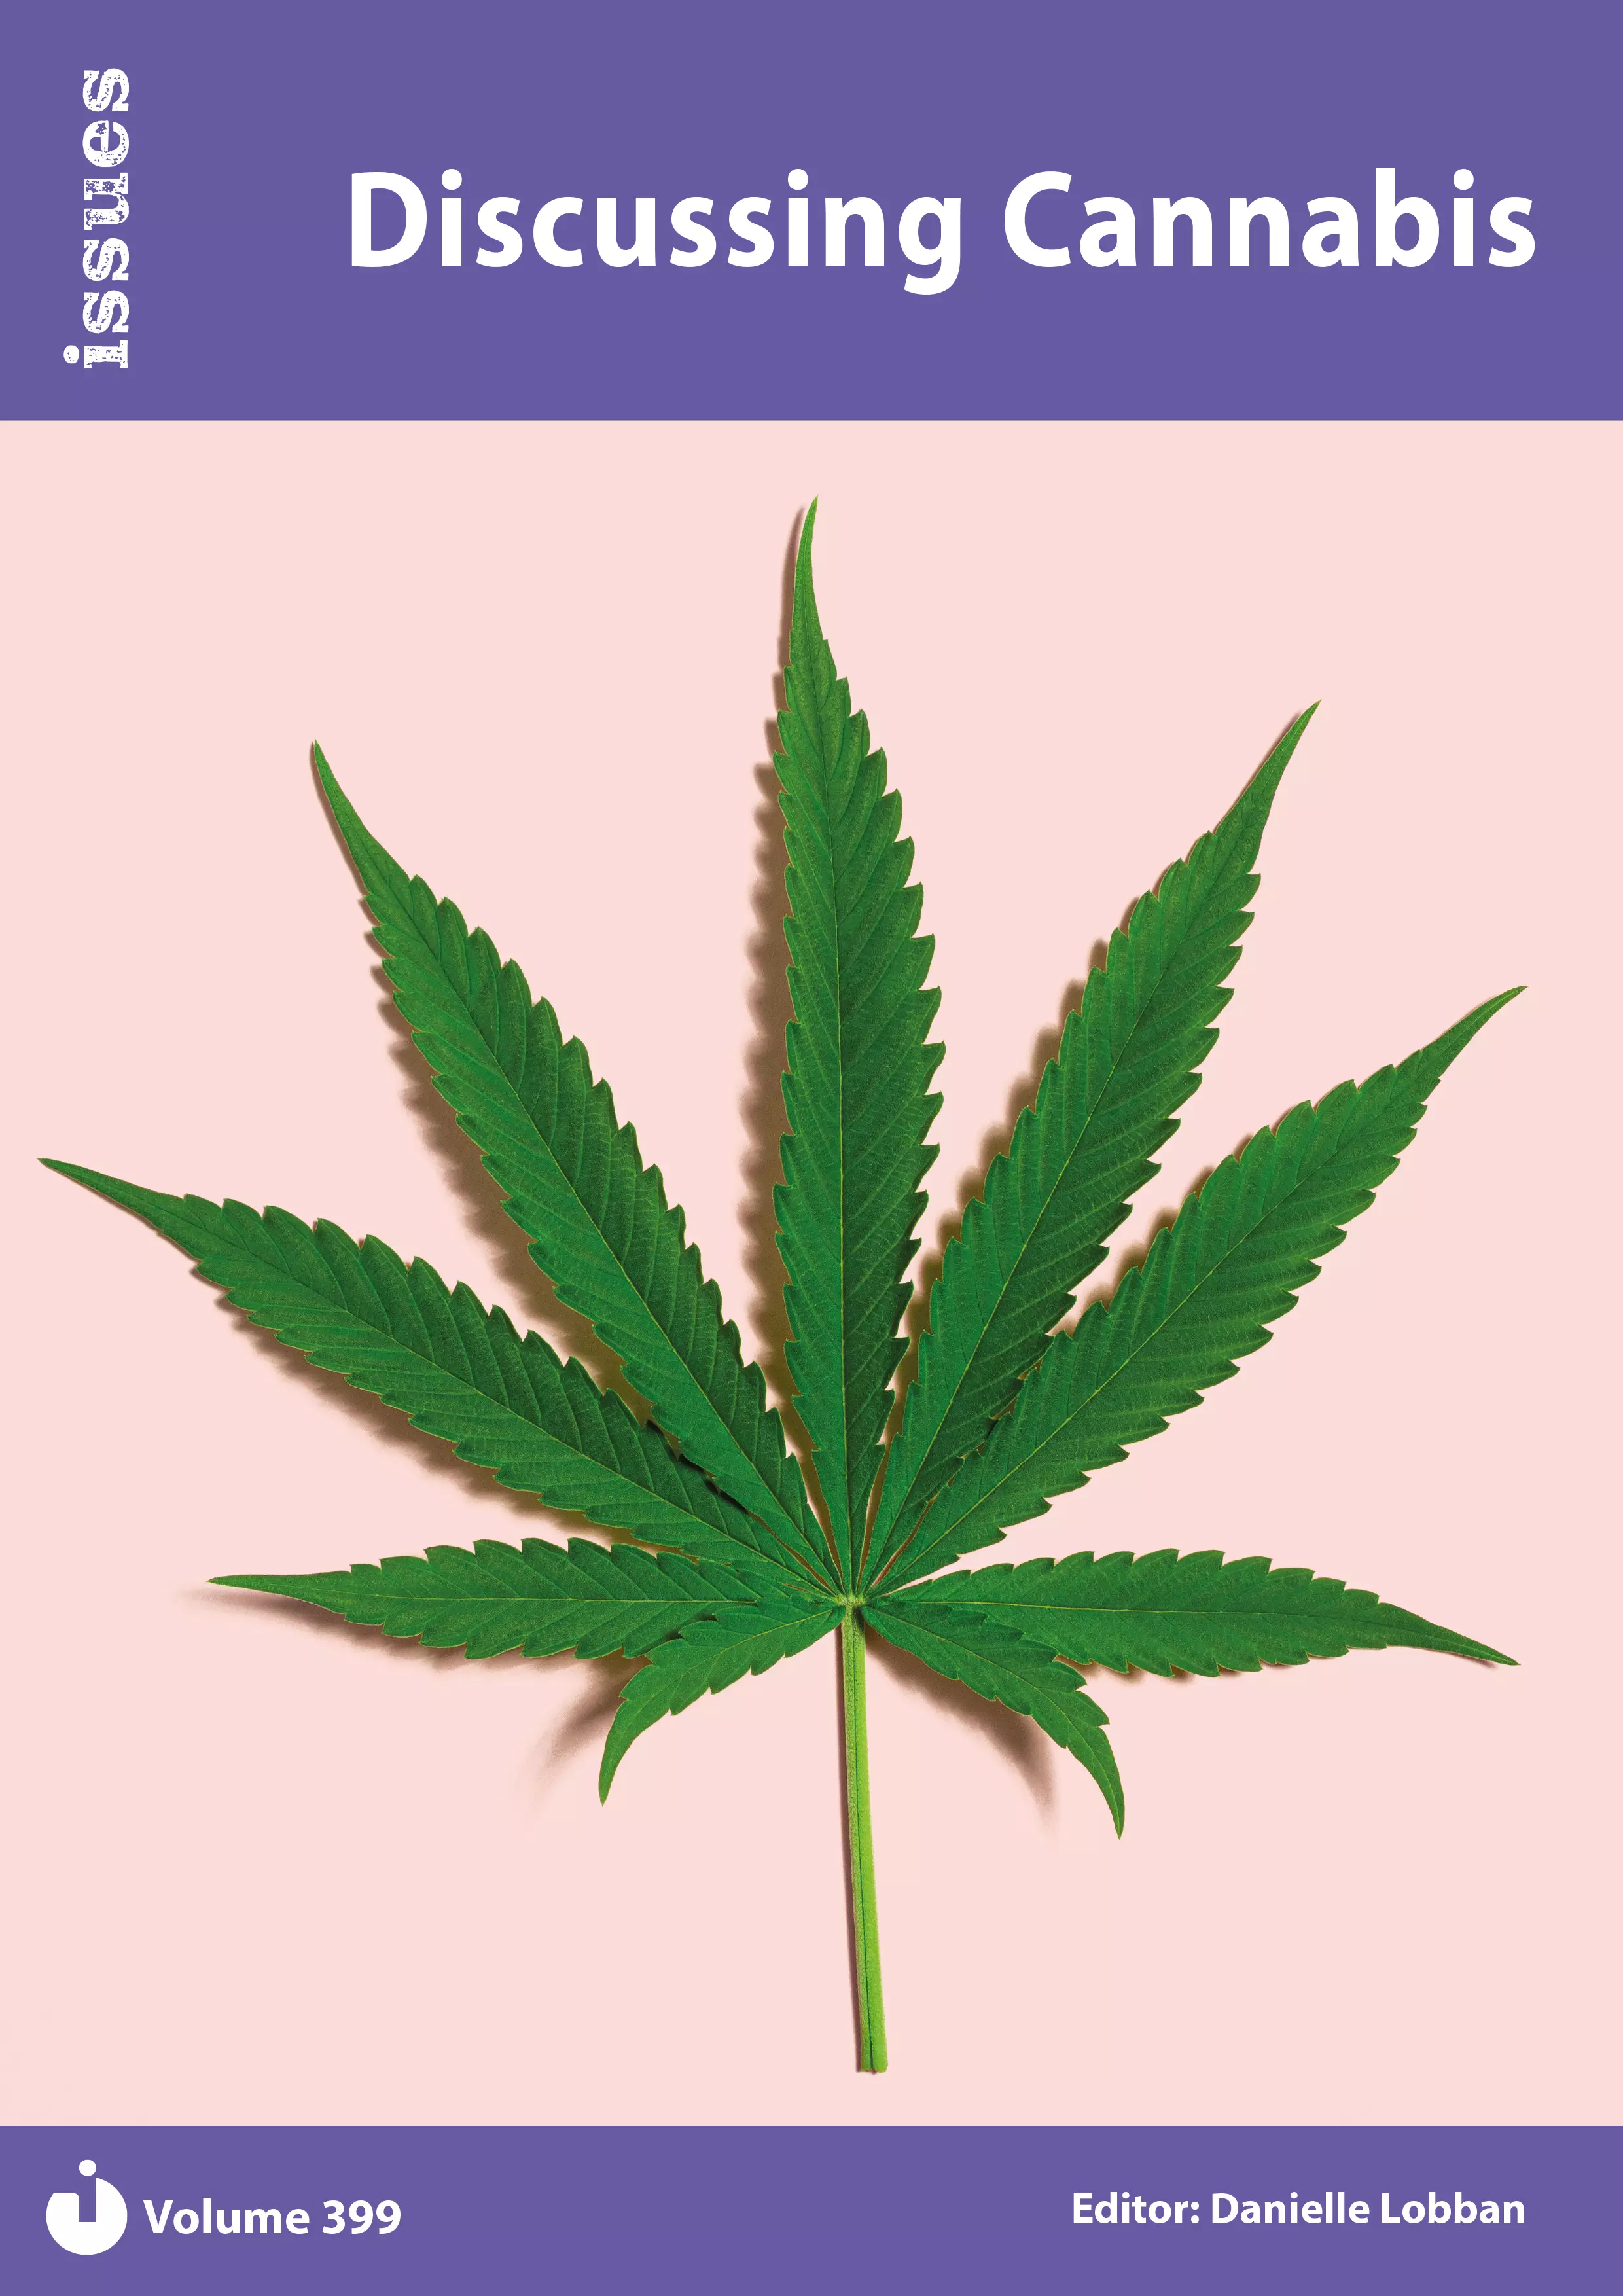 With almost a third of young people having tried cannabis, this book looks at the risks involved in ...